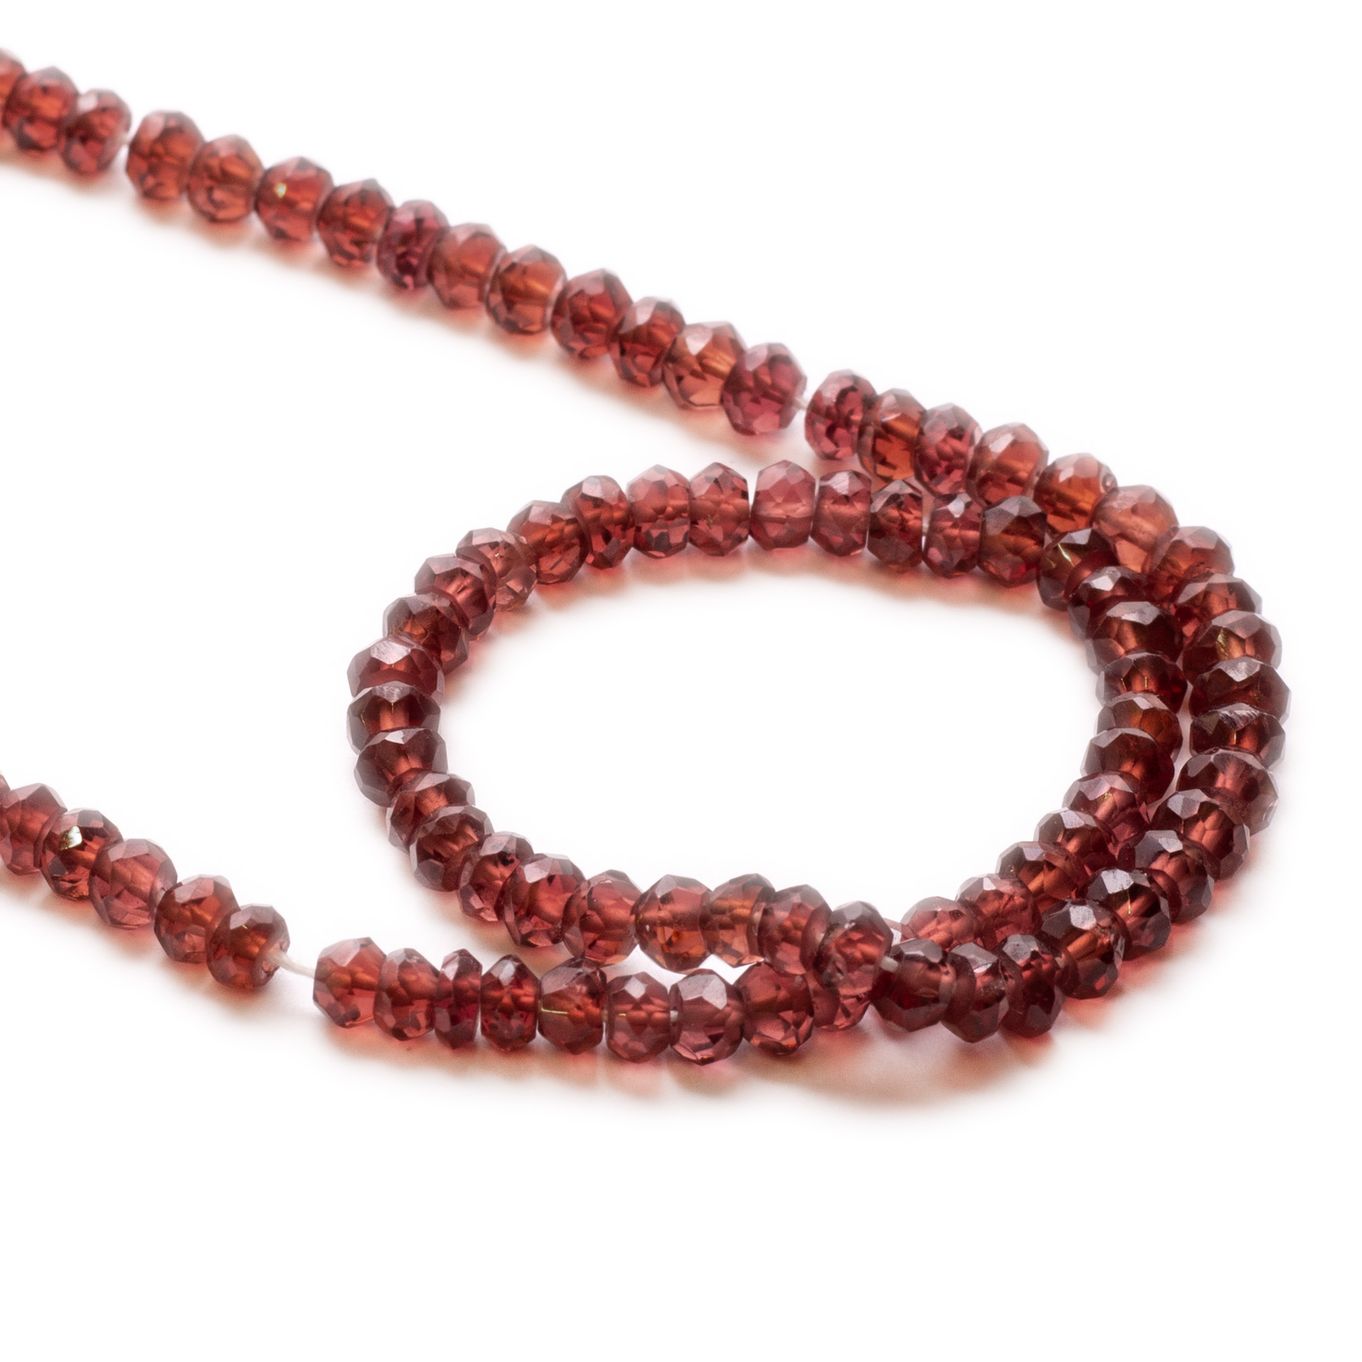 Garnet Faceted Rondelle Beads - Approx 3.5x2.5mm